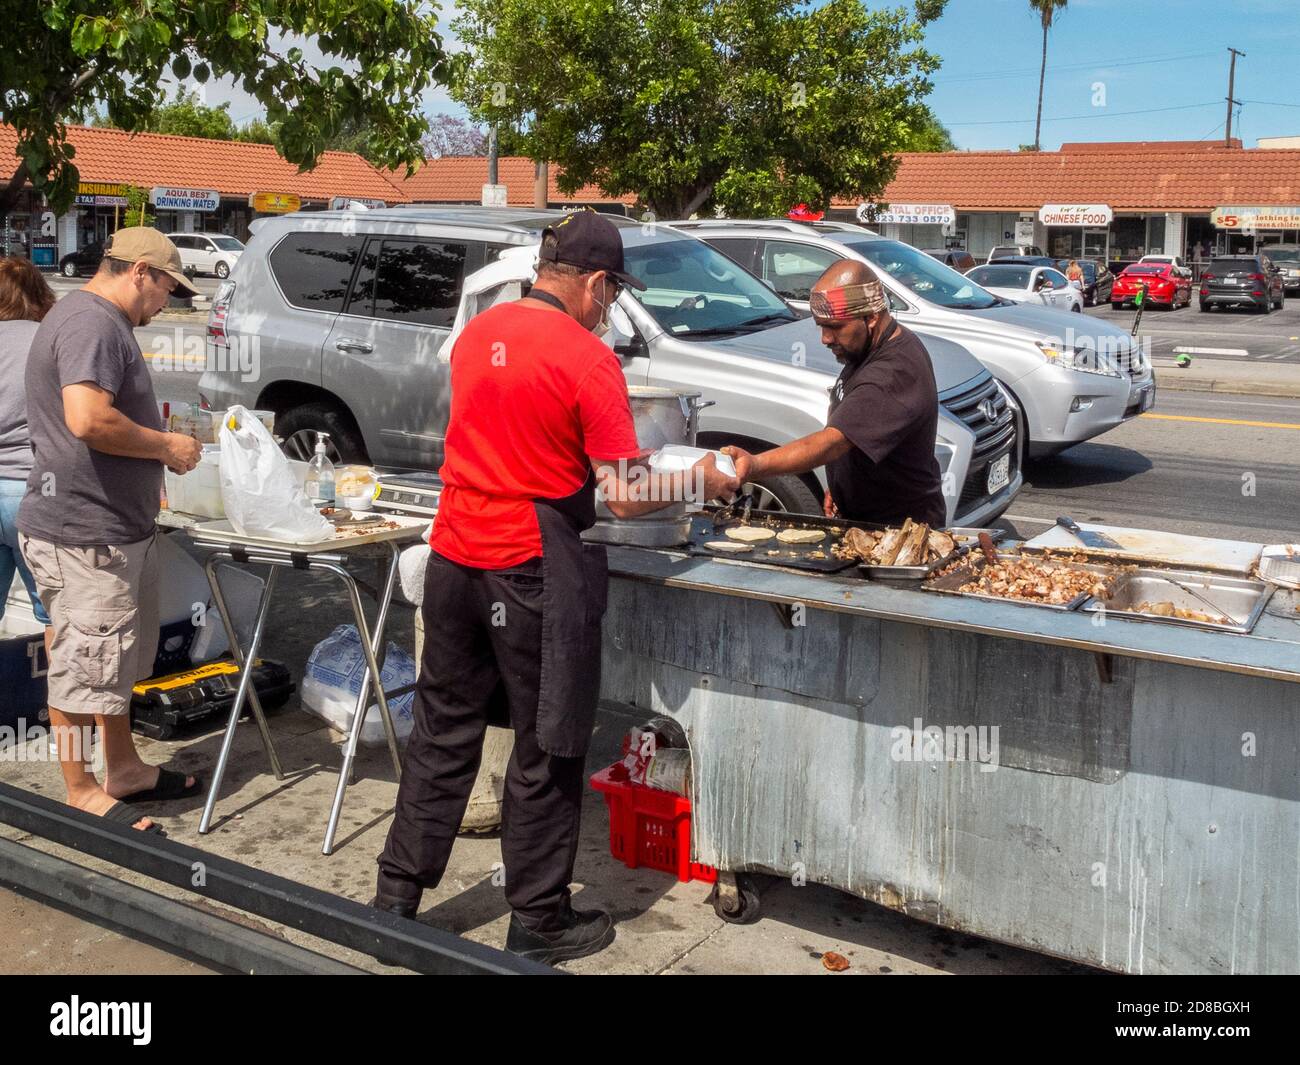 With restaurants closed in the coronavirus pandemic, an enterprising Hispanic chef moves his grill and pots outdoors to the sidewalk by a bus stop in Stock Photo